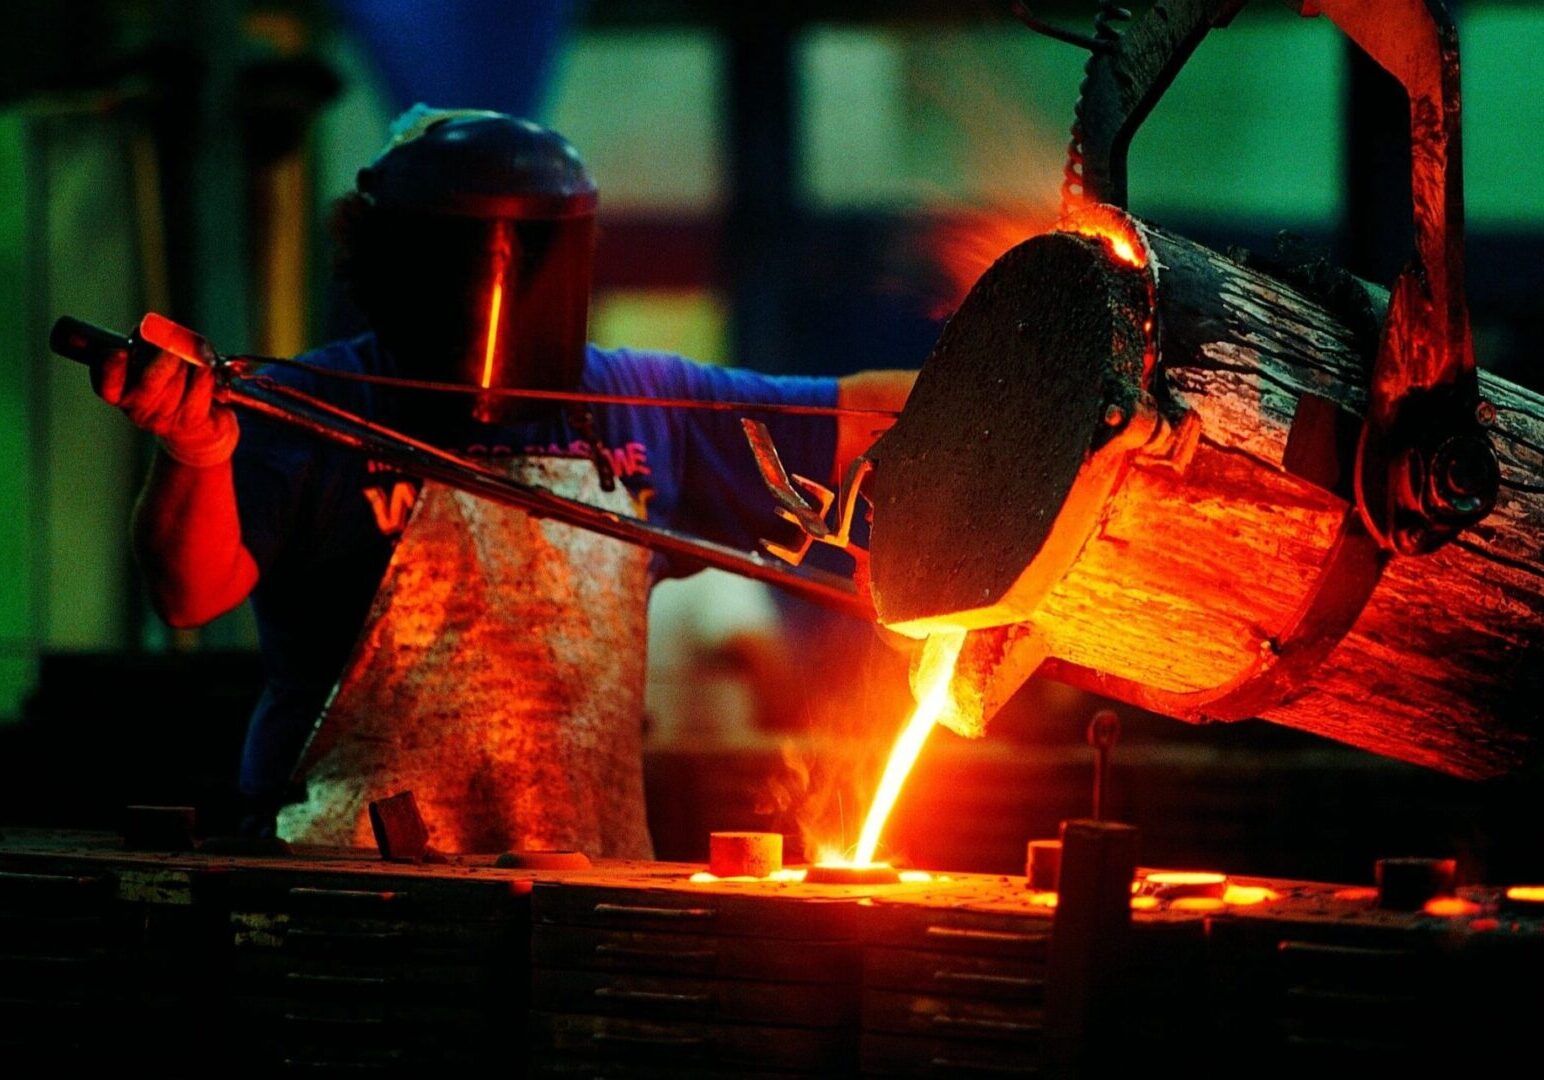 A person working in an iron foundry at night.